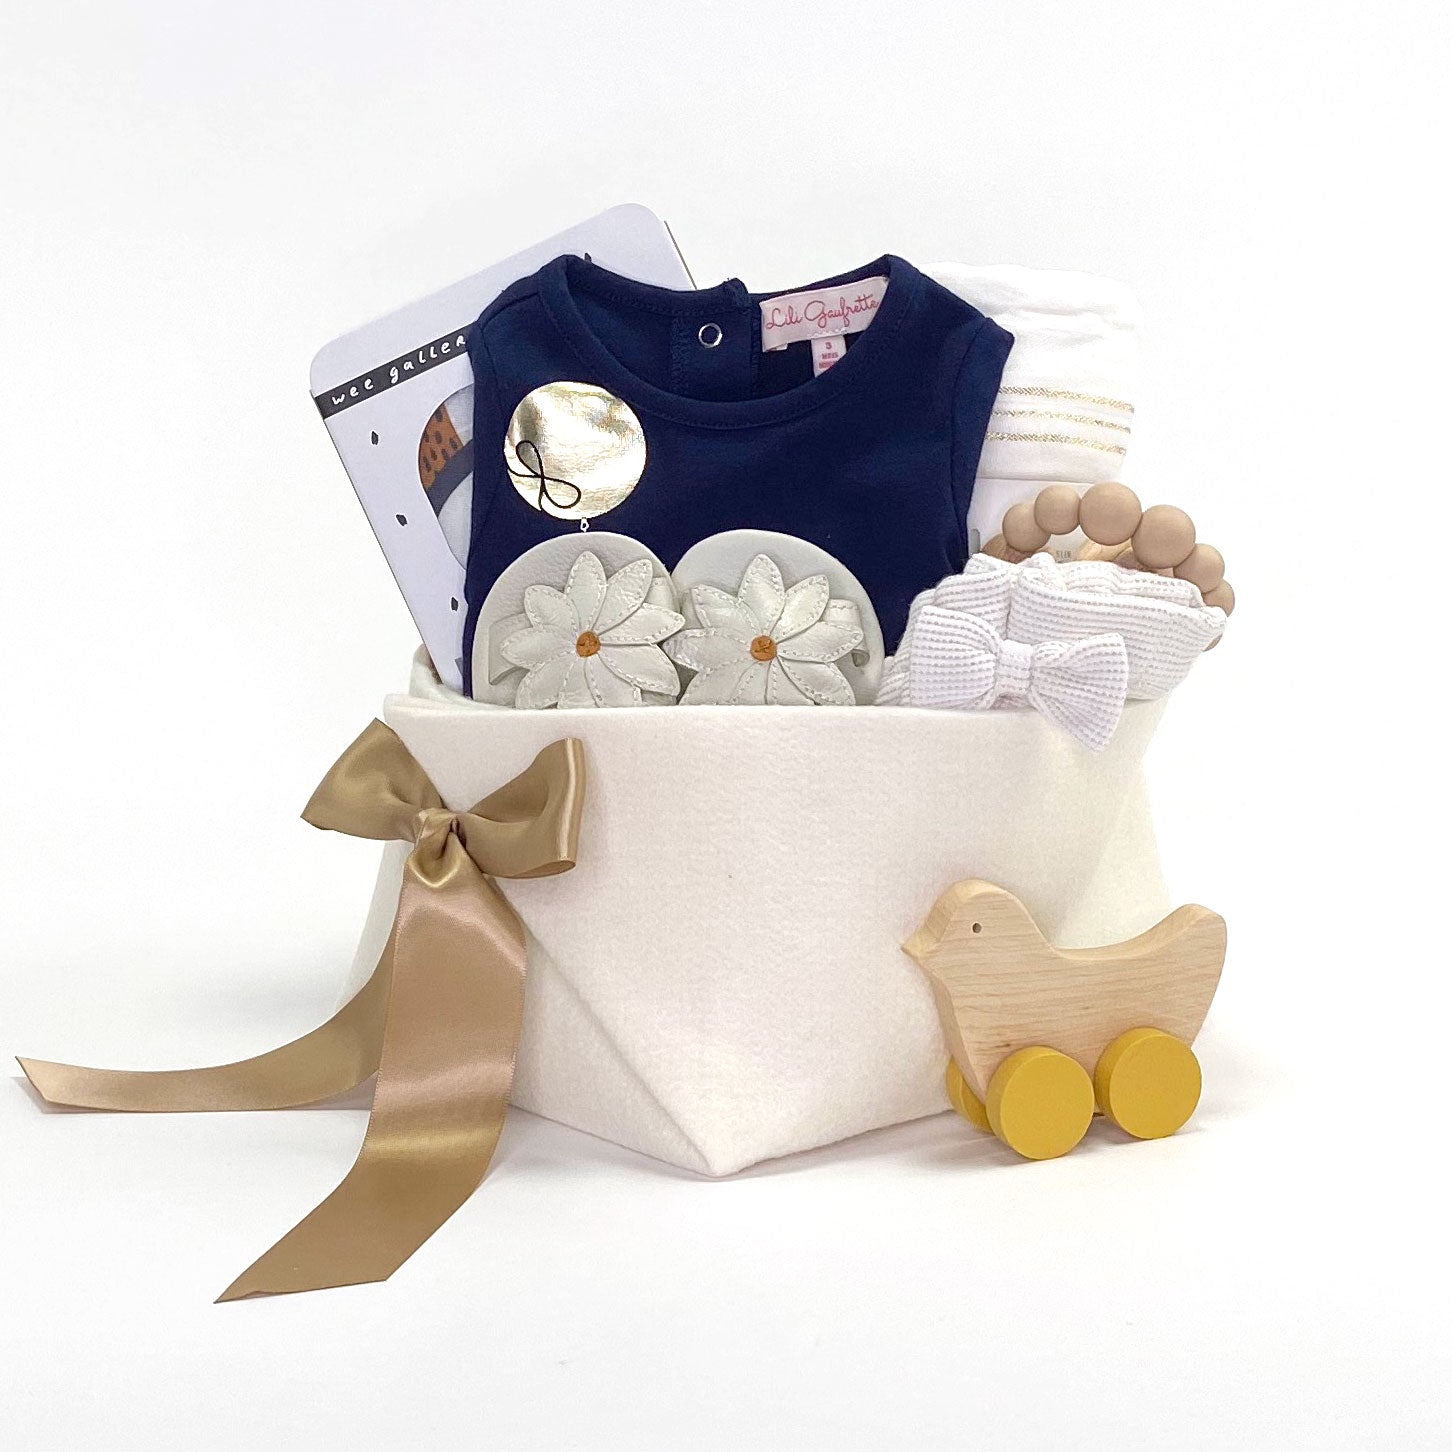 Luxury Baby Girl Gift Basket at Bonjour Baby Baskets featuring a lovely top and shorts with a little bit of gold, leather sandals and curated accessories that parents would love. 